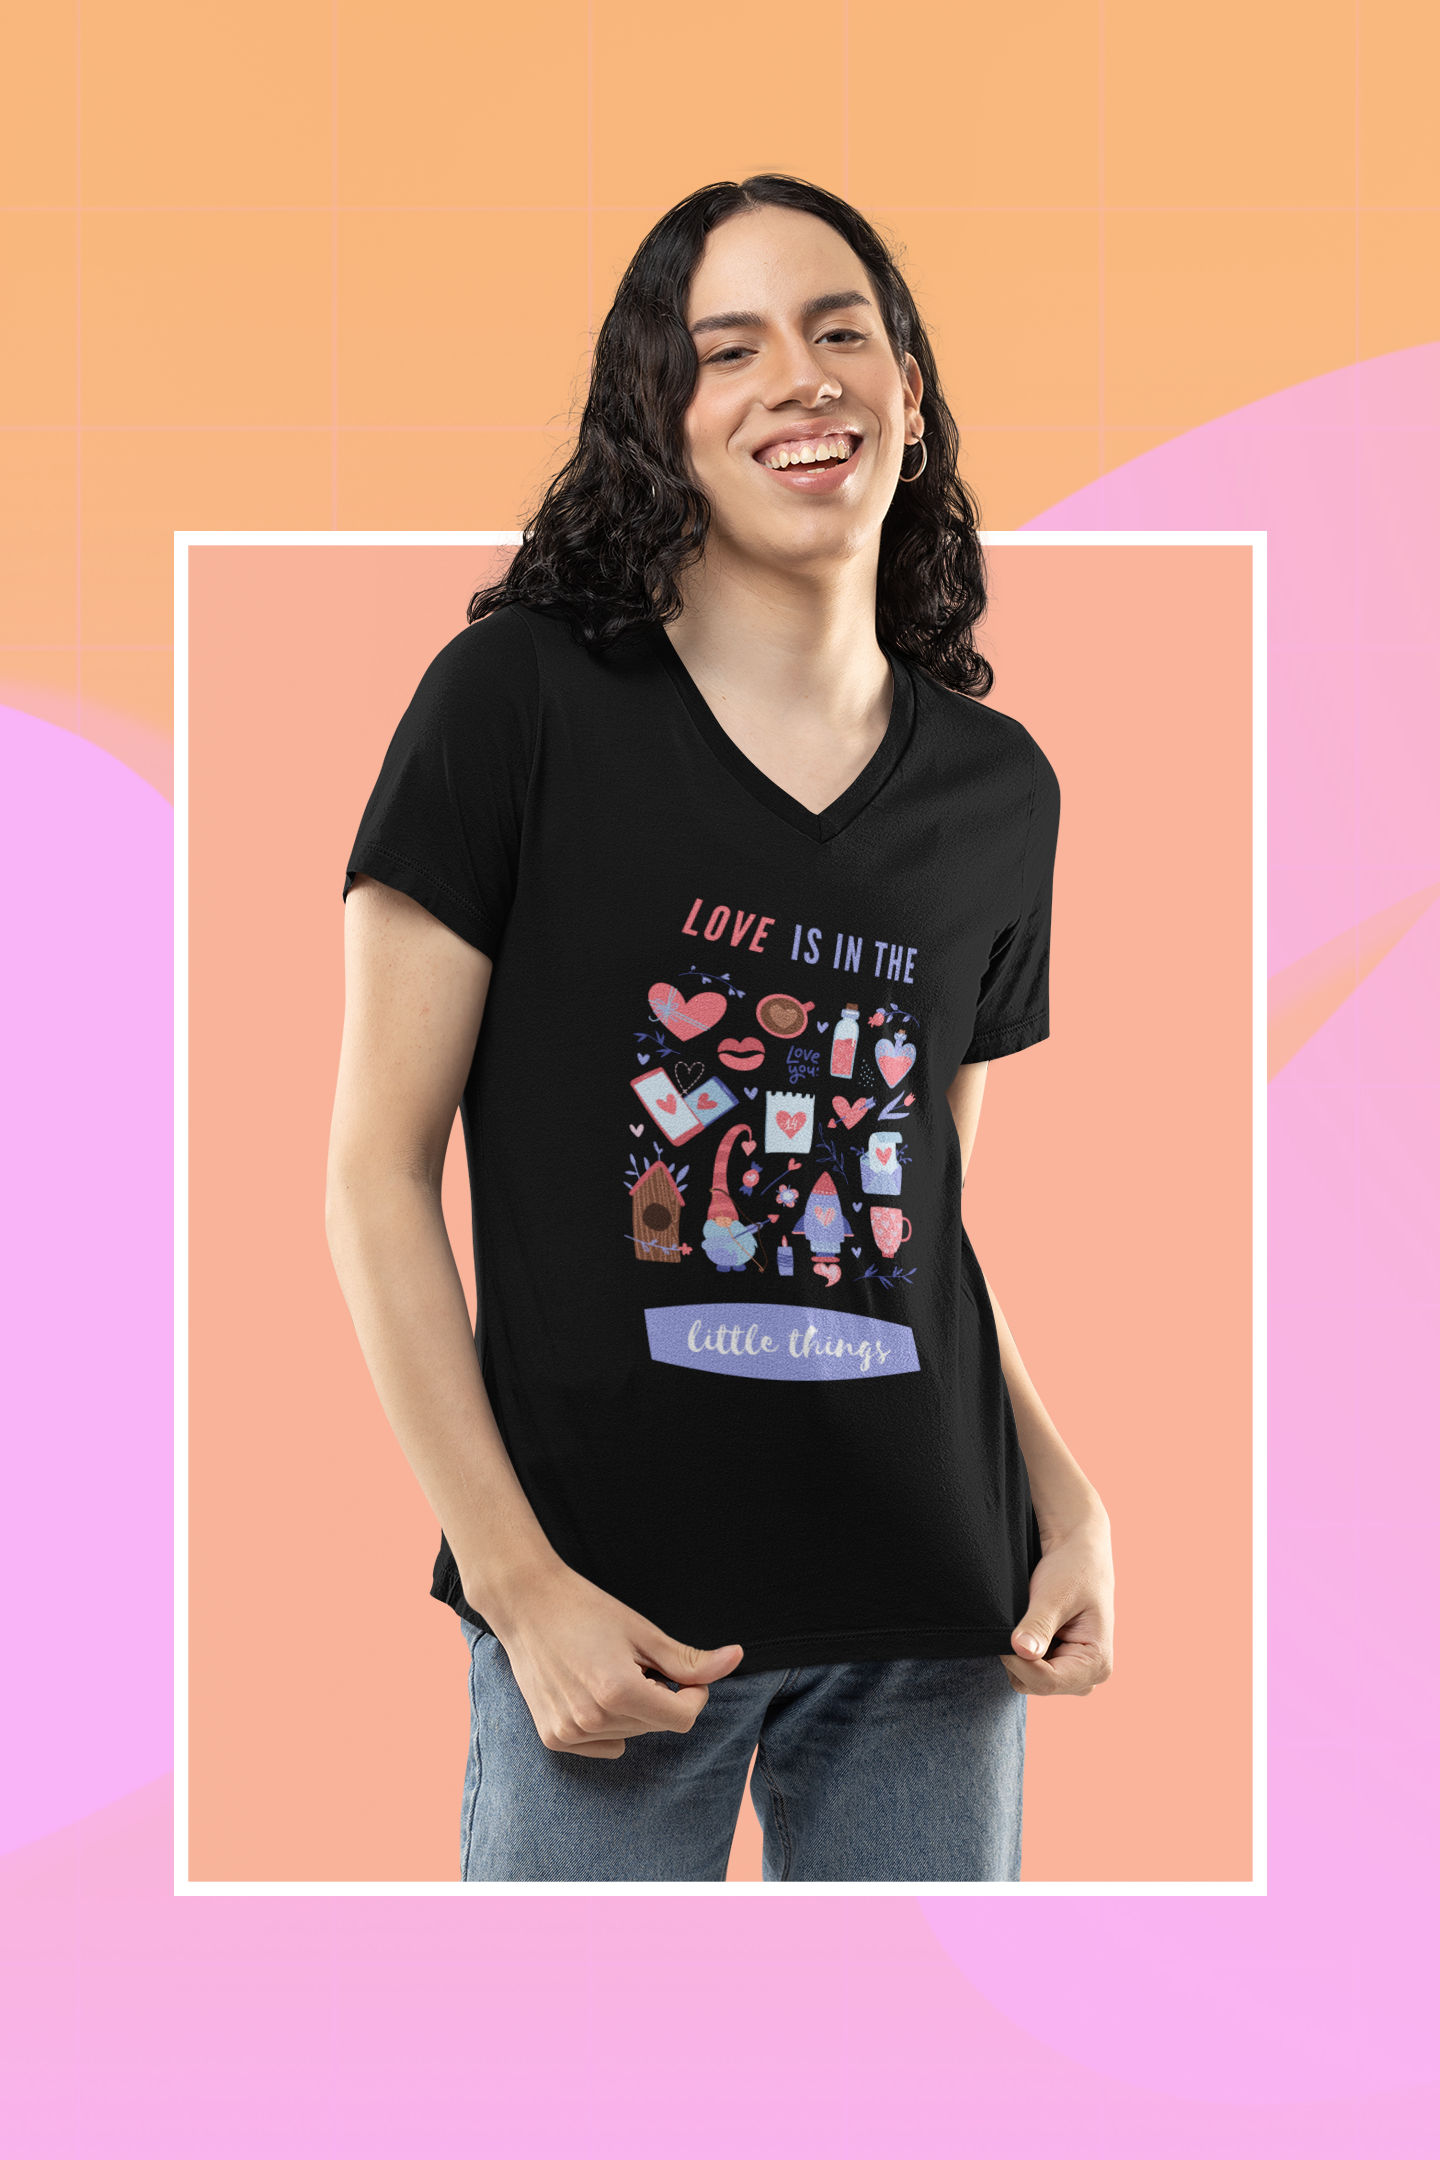 LOVE is in the little things - Premium cotton tee celebrating love...